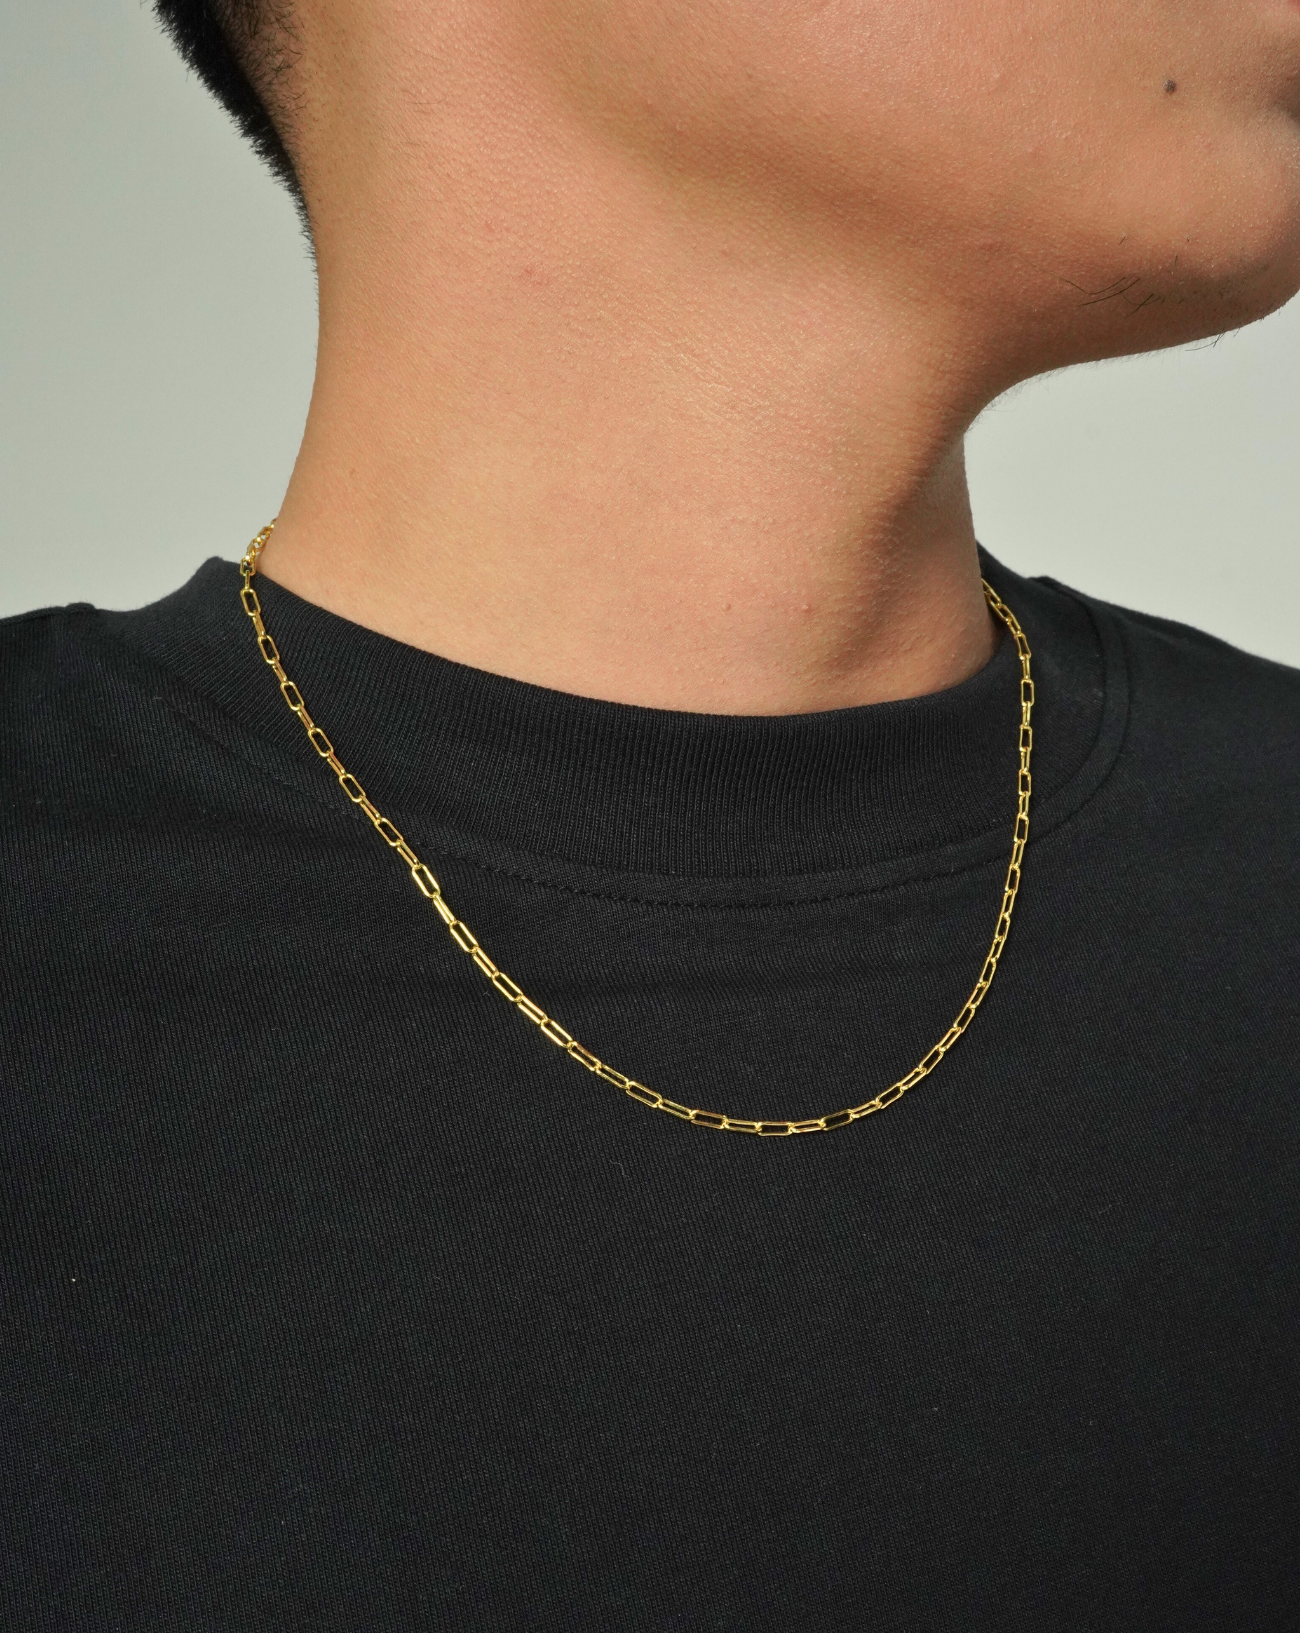 NEW MINI PAPPERCLIP CHAIN NECKLACE